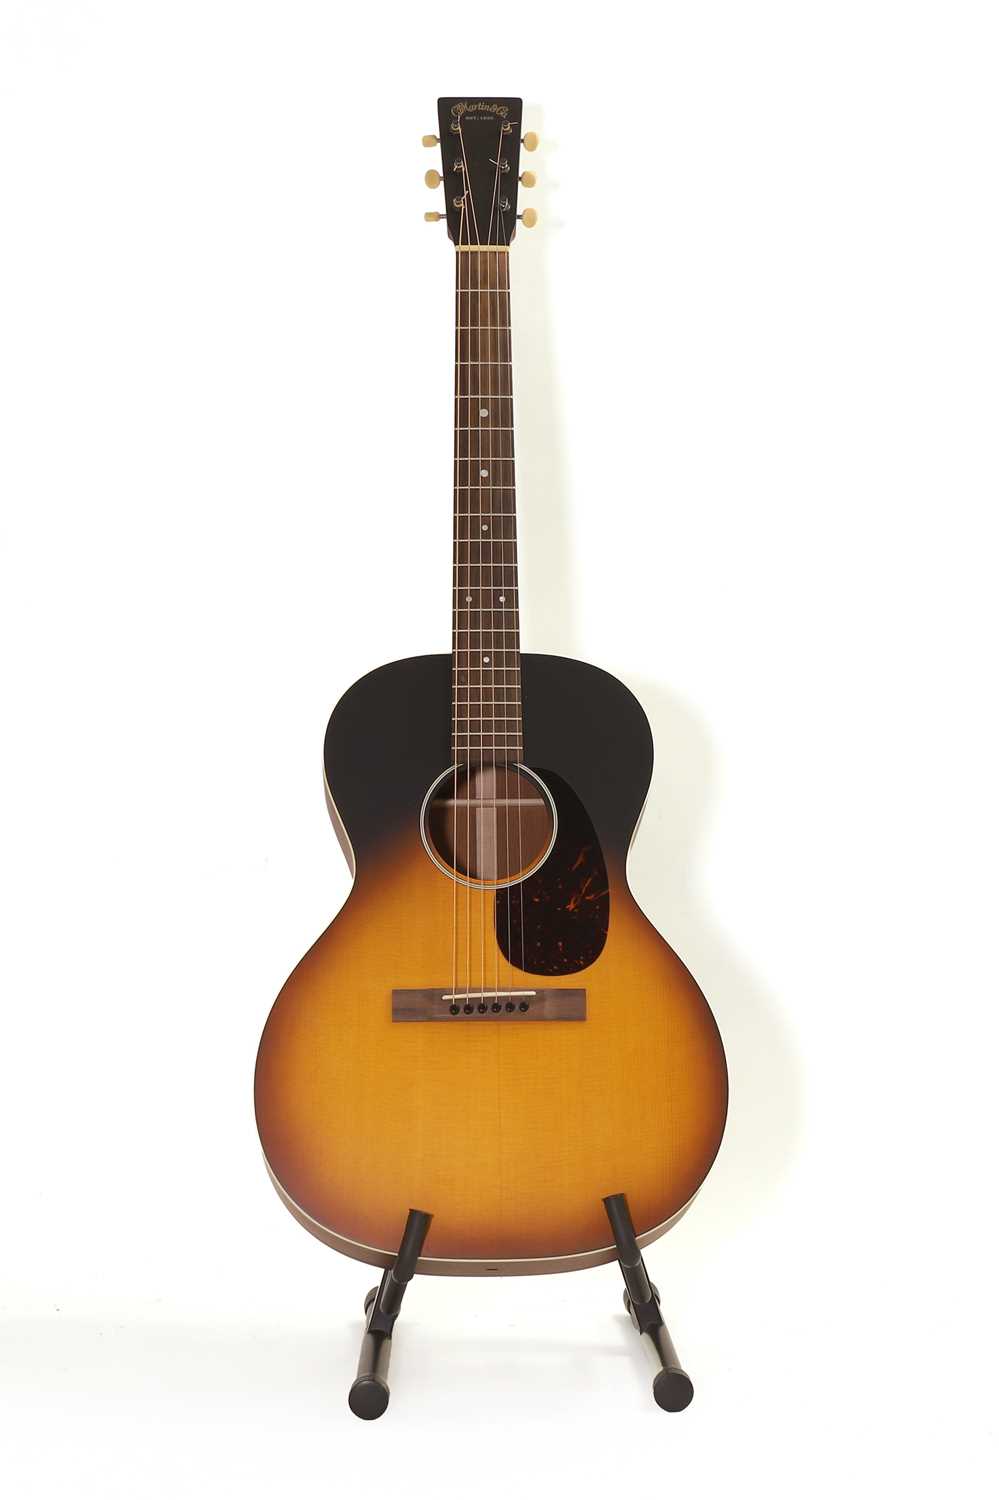 A 2009 Martin 00L-17 acoustic guitar, - Image 3 of 13